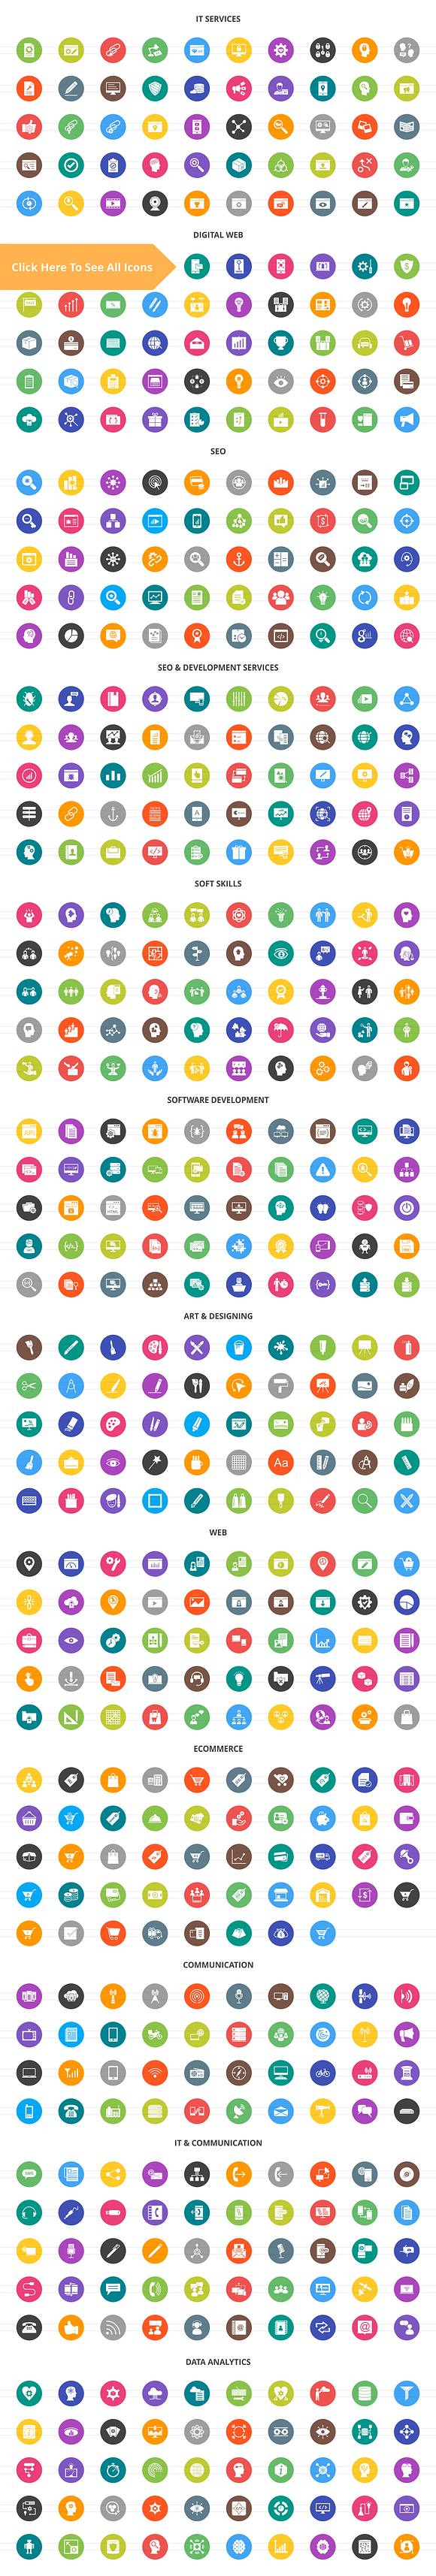 588 Services Filled Round Icons in Graphics - product preview 1